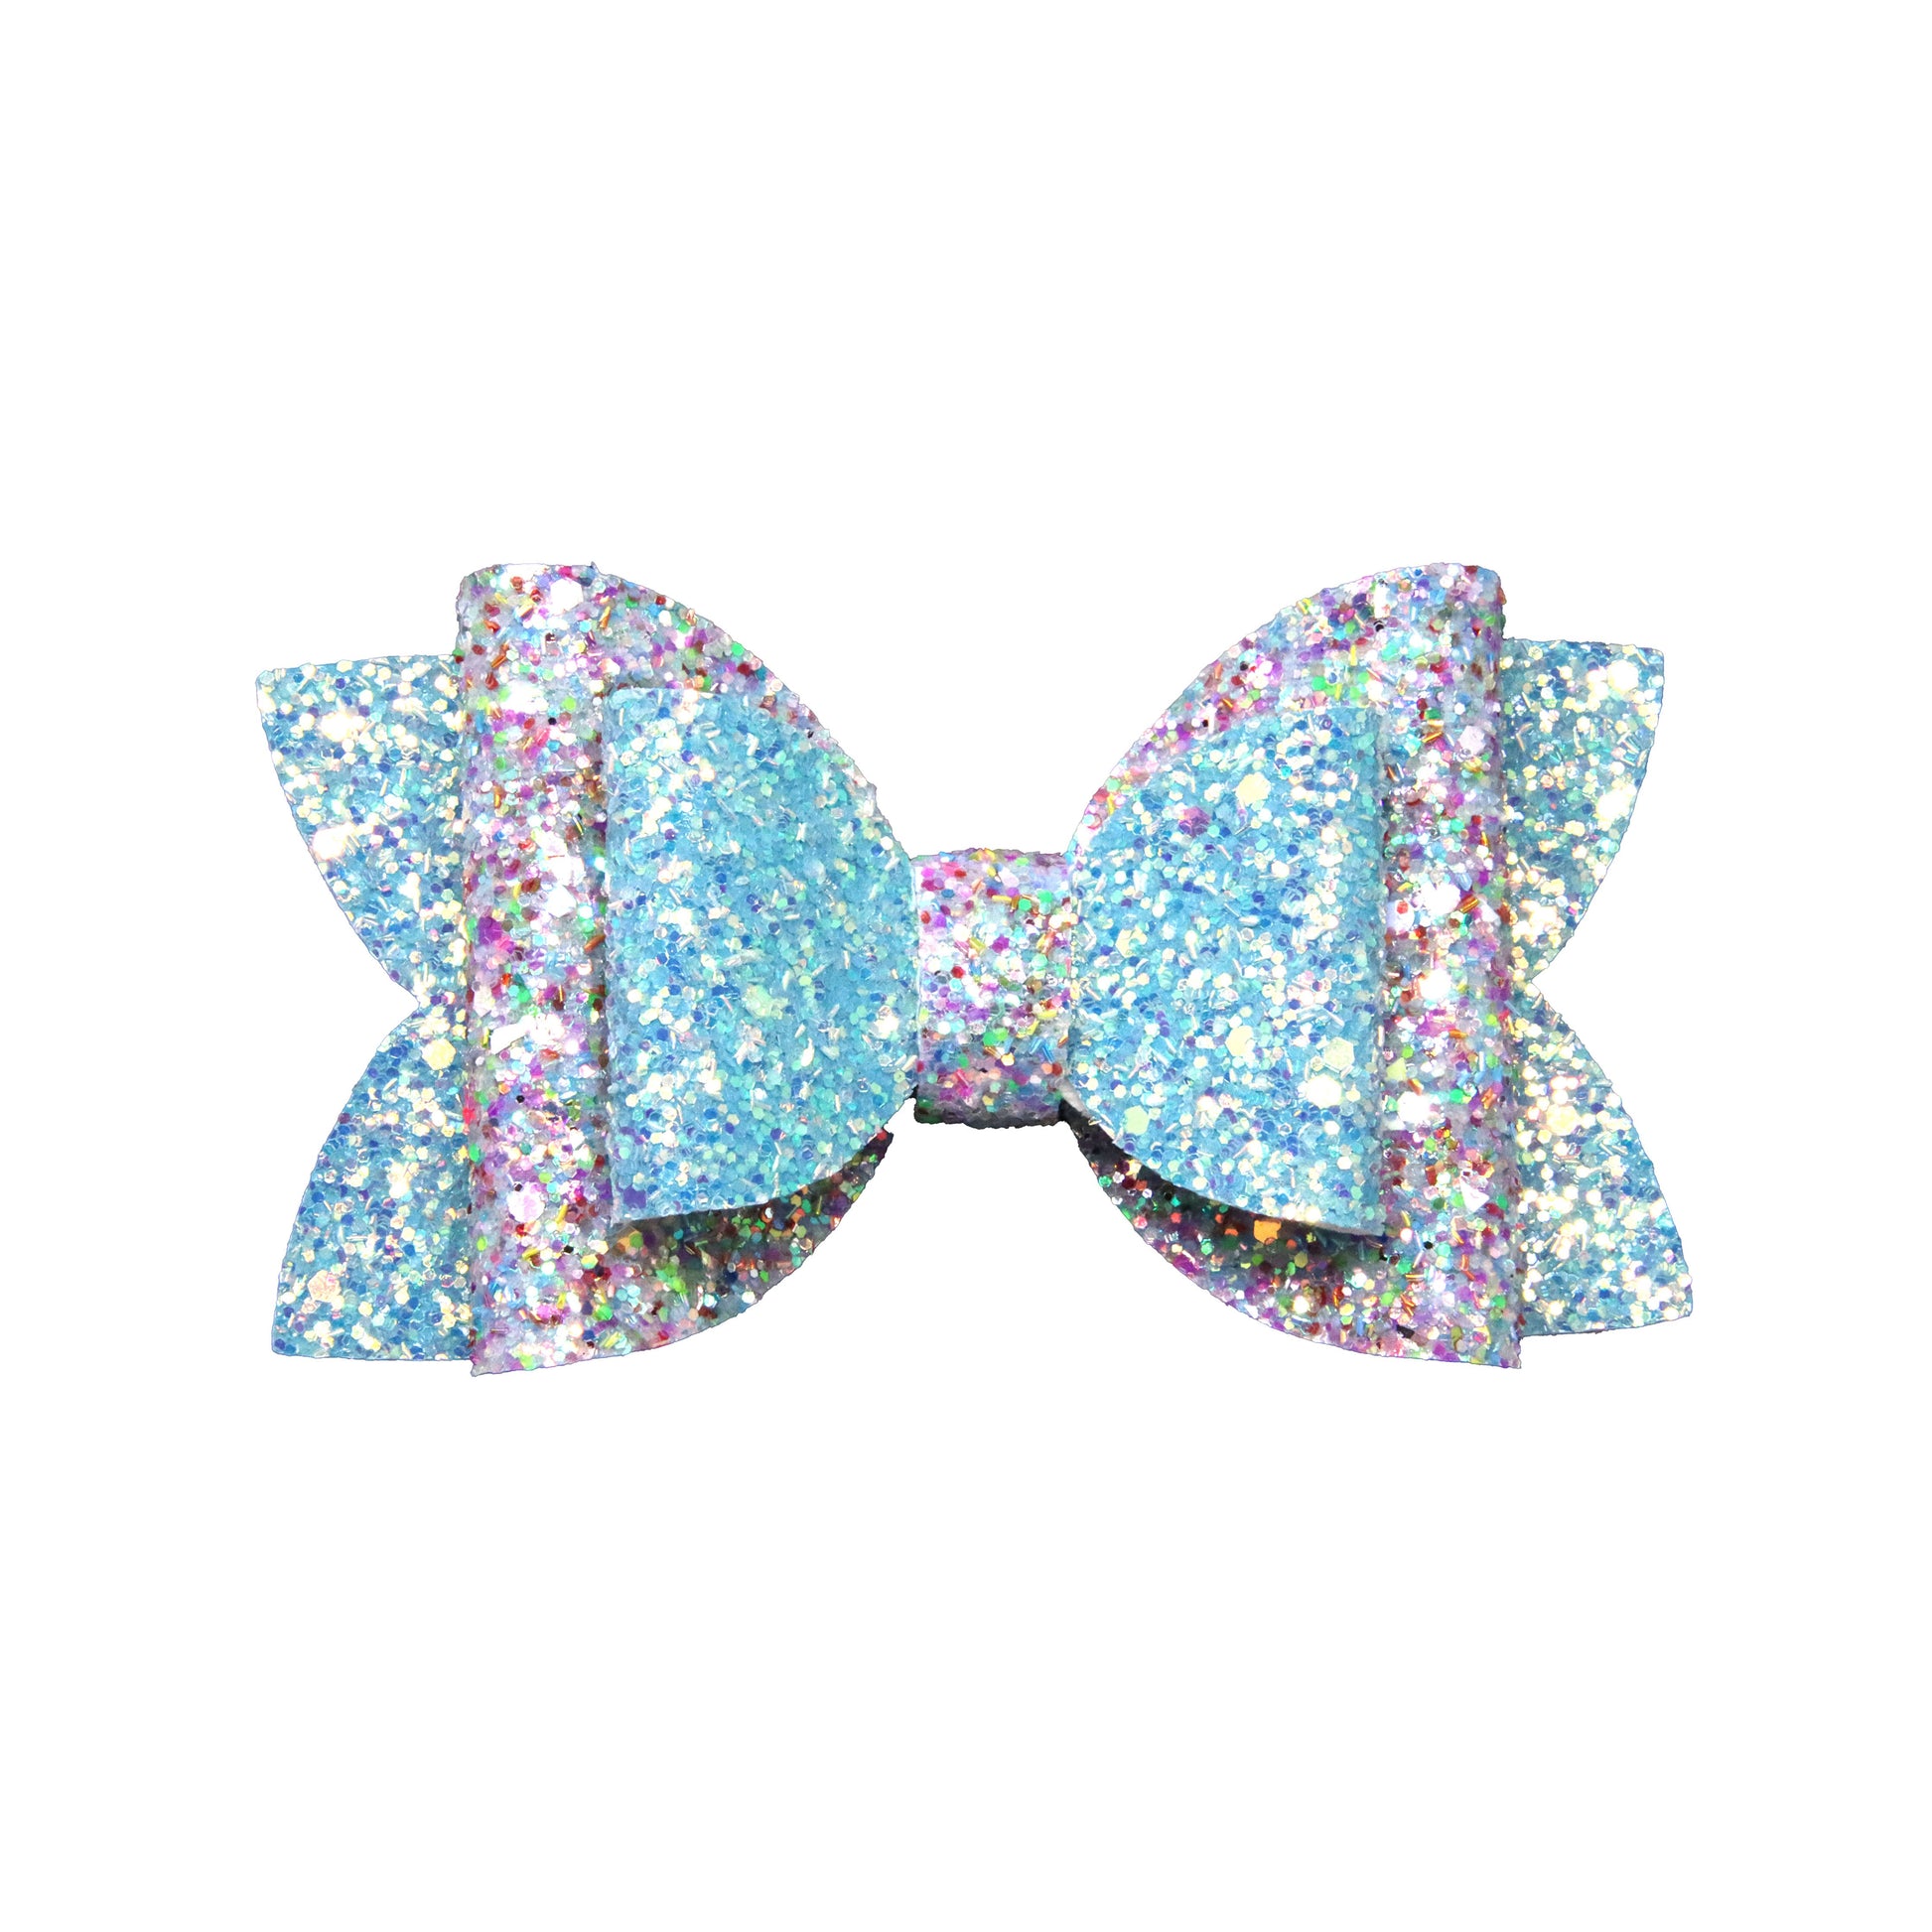 5 inch Light-up Seaglass Double Diva Bow